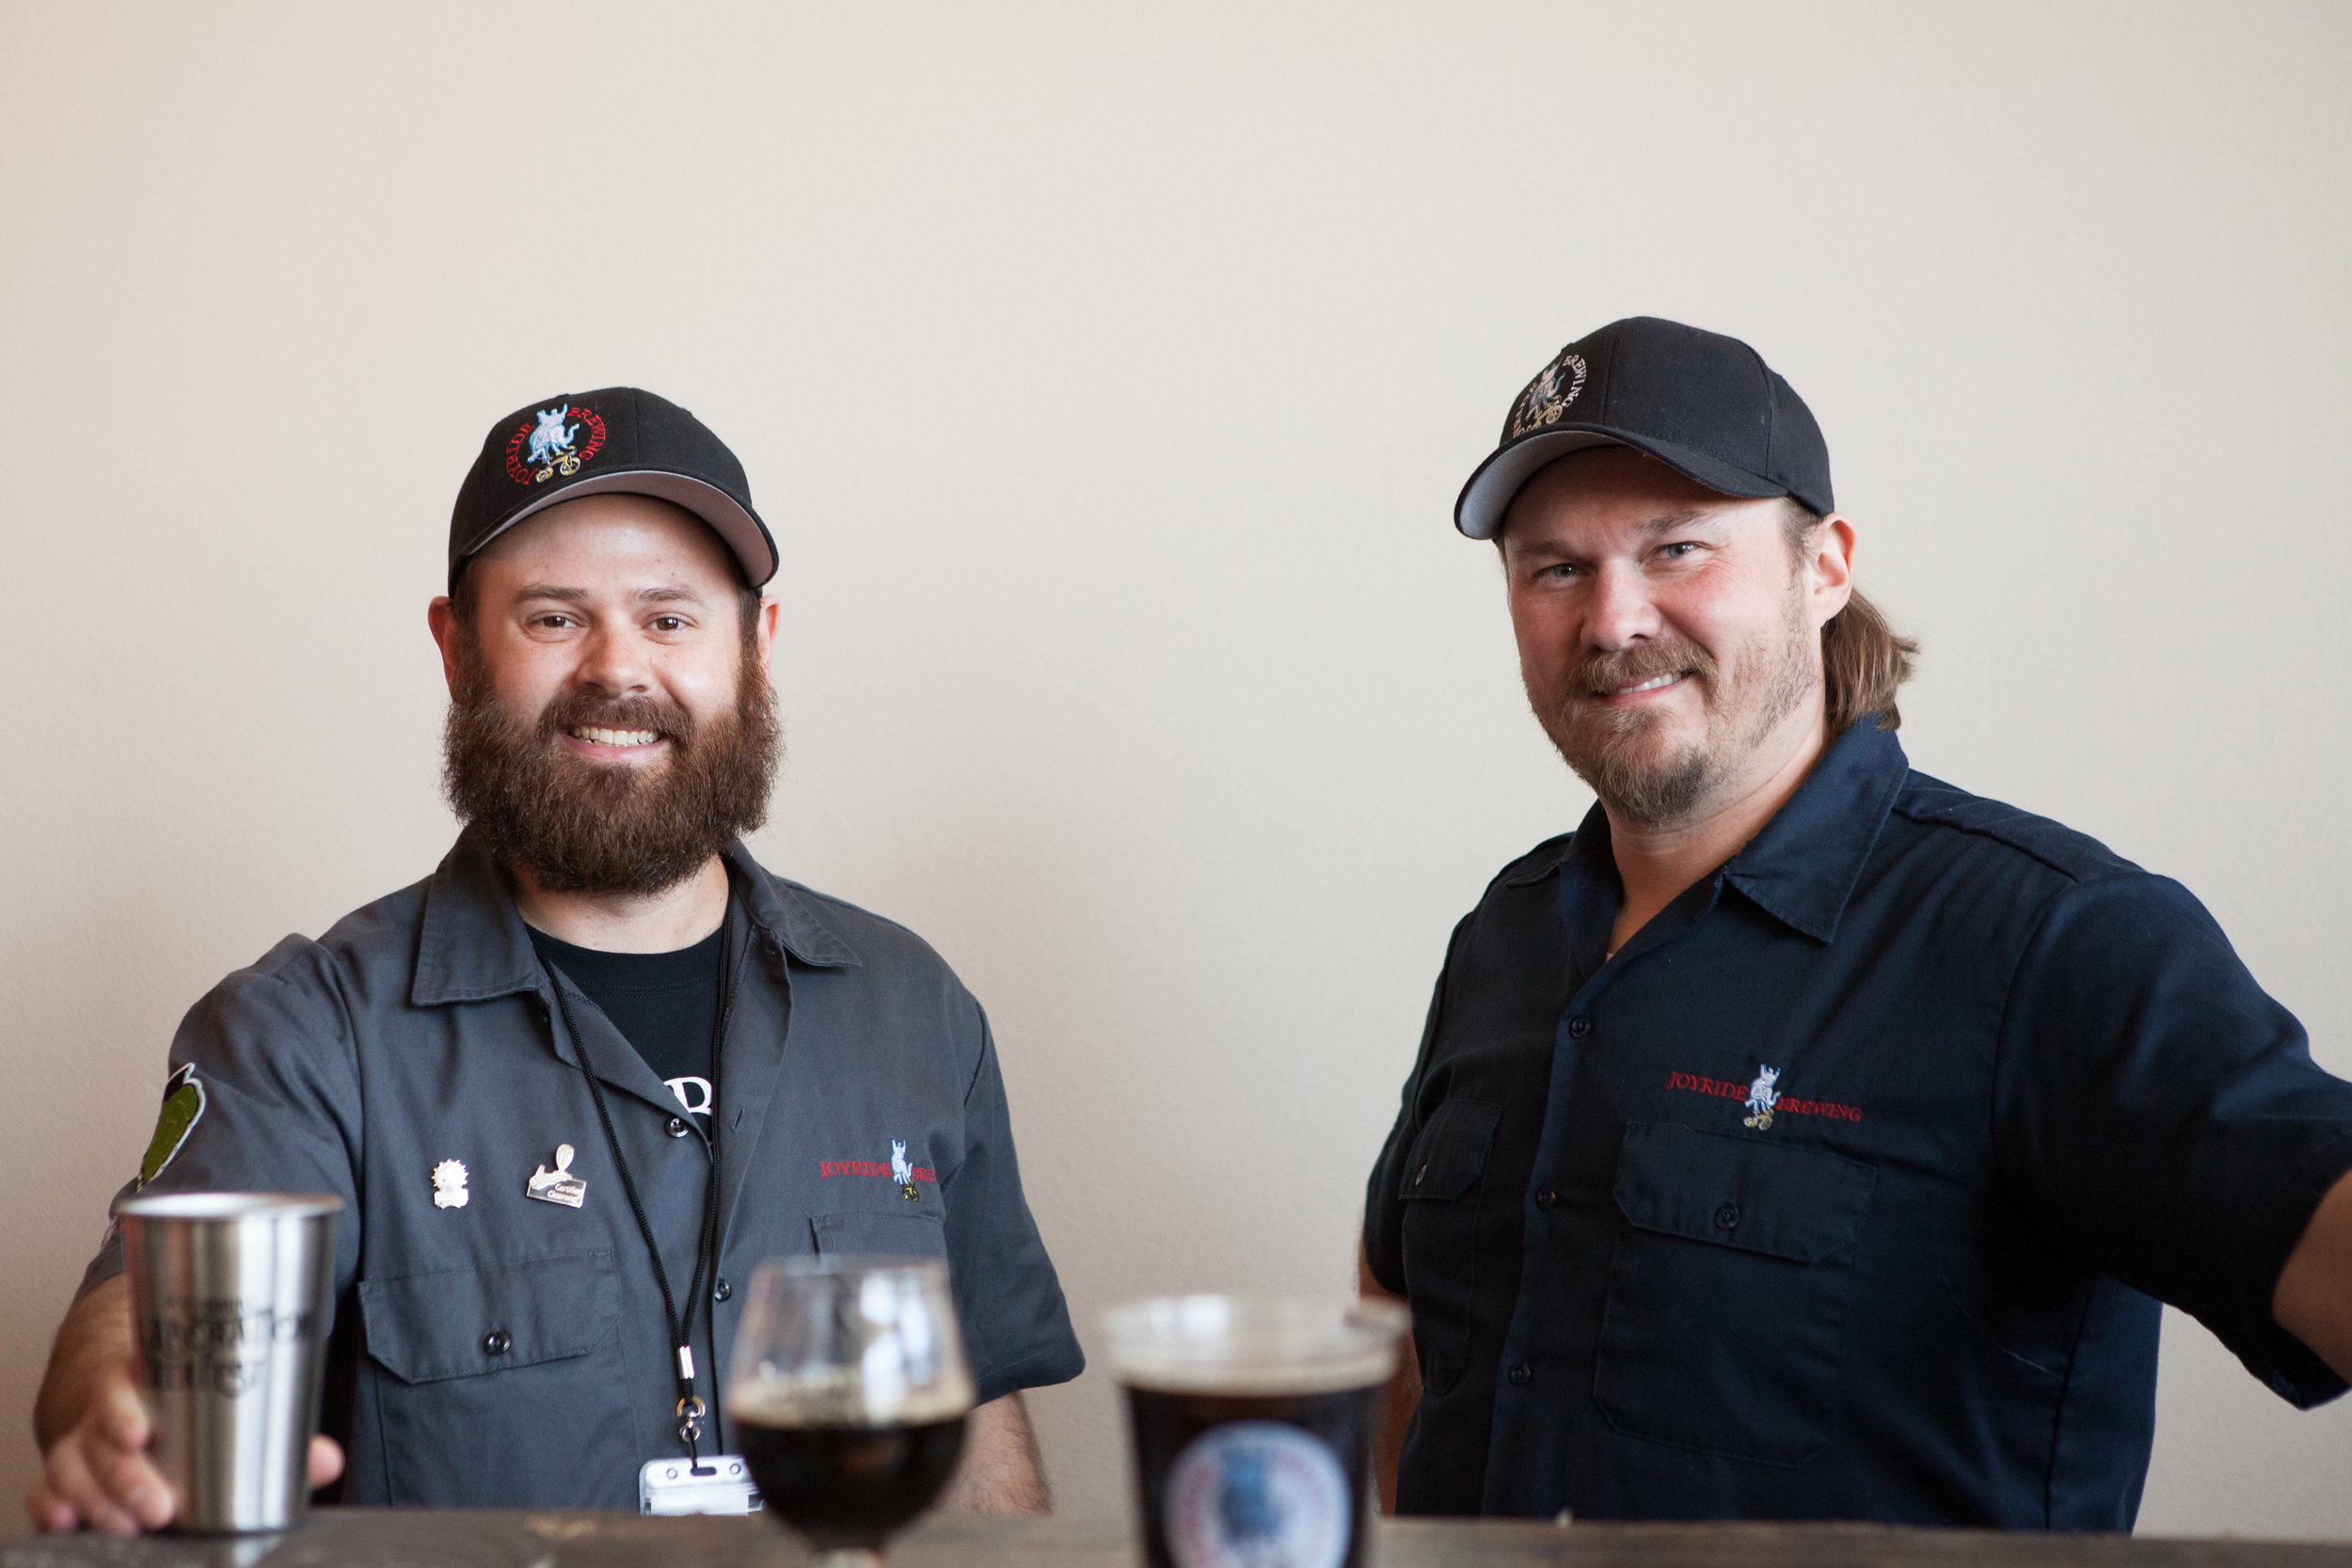   Grant Babb, owner of Joyride Brewing Company in Edgewater, takes a break from the fest for a quick photo with Joyride Brewmaster and co-founder Dave Bergen.&nbsp; Joyride collaborated with Heretic Brewing Co. out of Fairfield, CA to create the Star